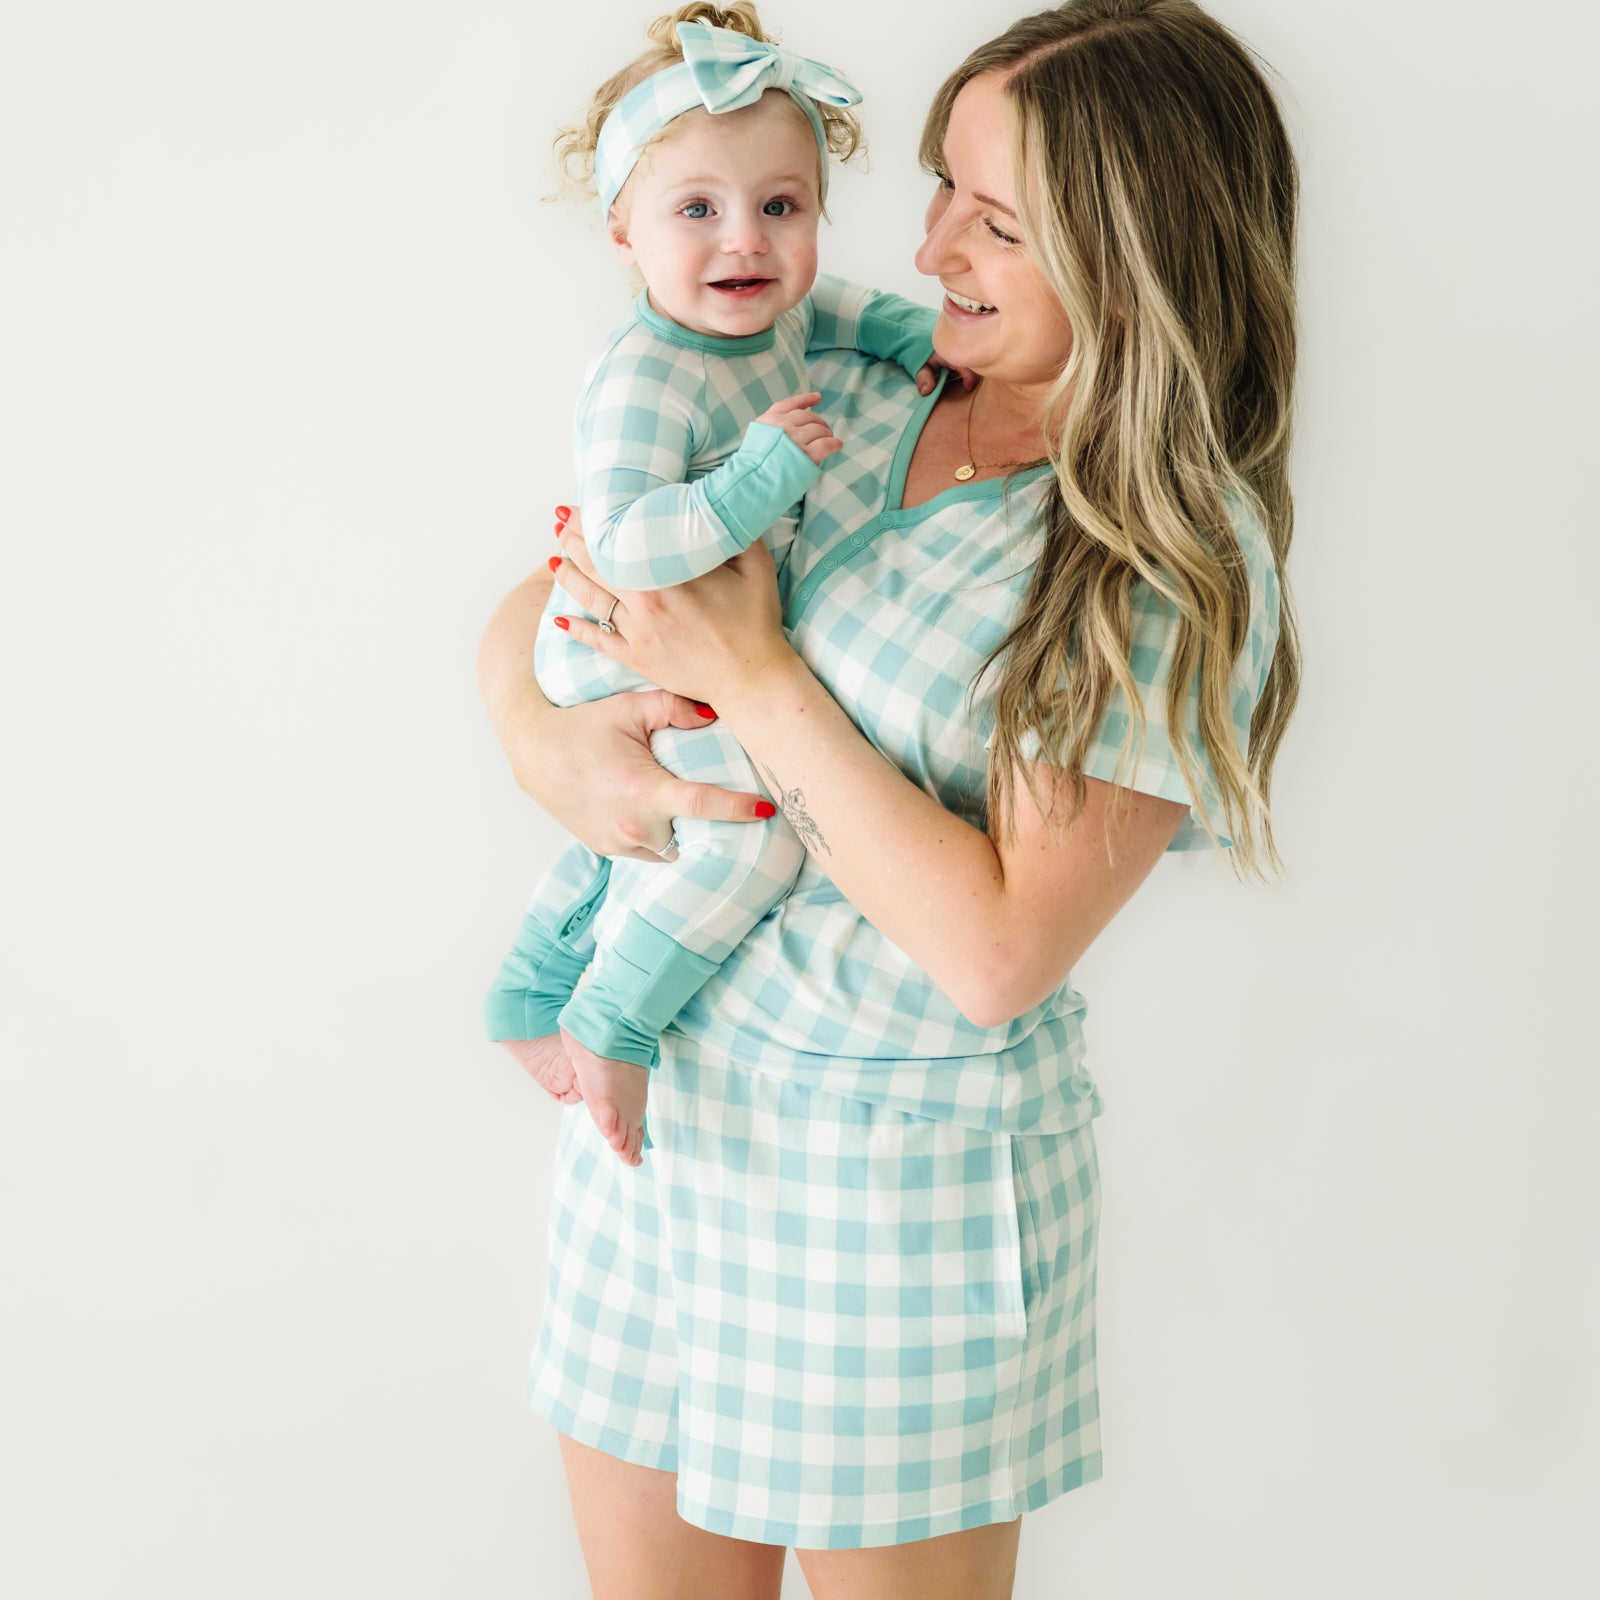 Woman holding her child wearing matching Pink Gingham pajamas. Mom is wearing women's Aqua Gingham pajama shorts and matching women's short sleeve pajama top. Child is wearing a matching Aqua Gingham crescent zippy paired with a matching luxe bow headband